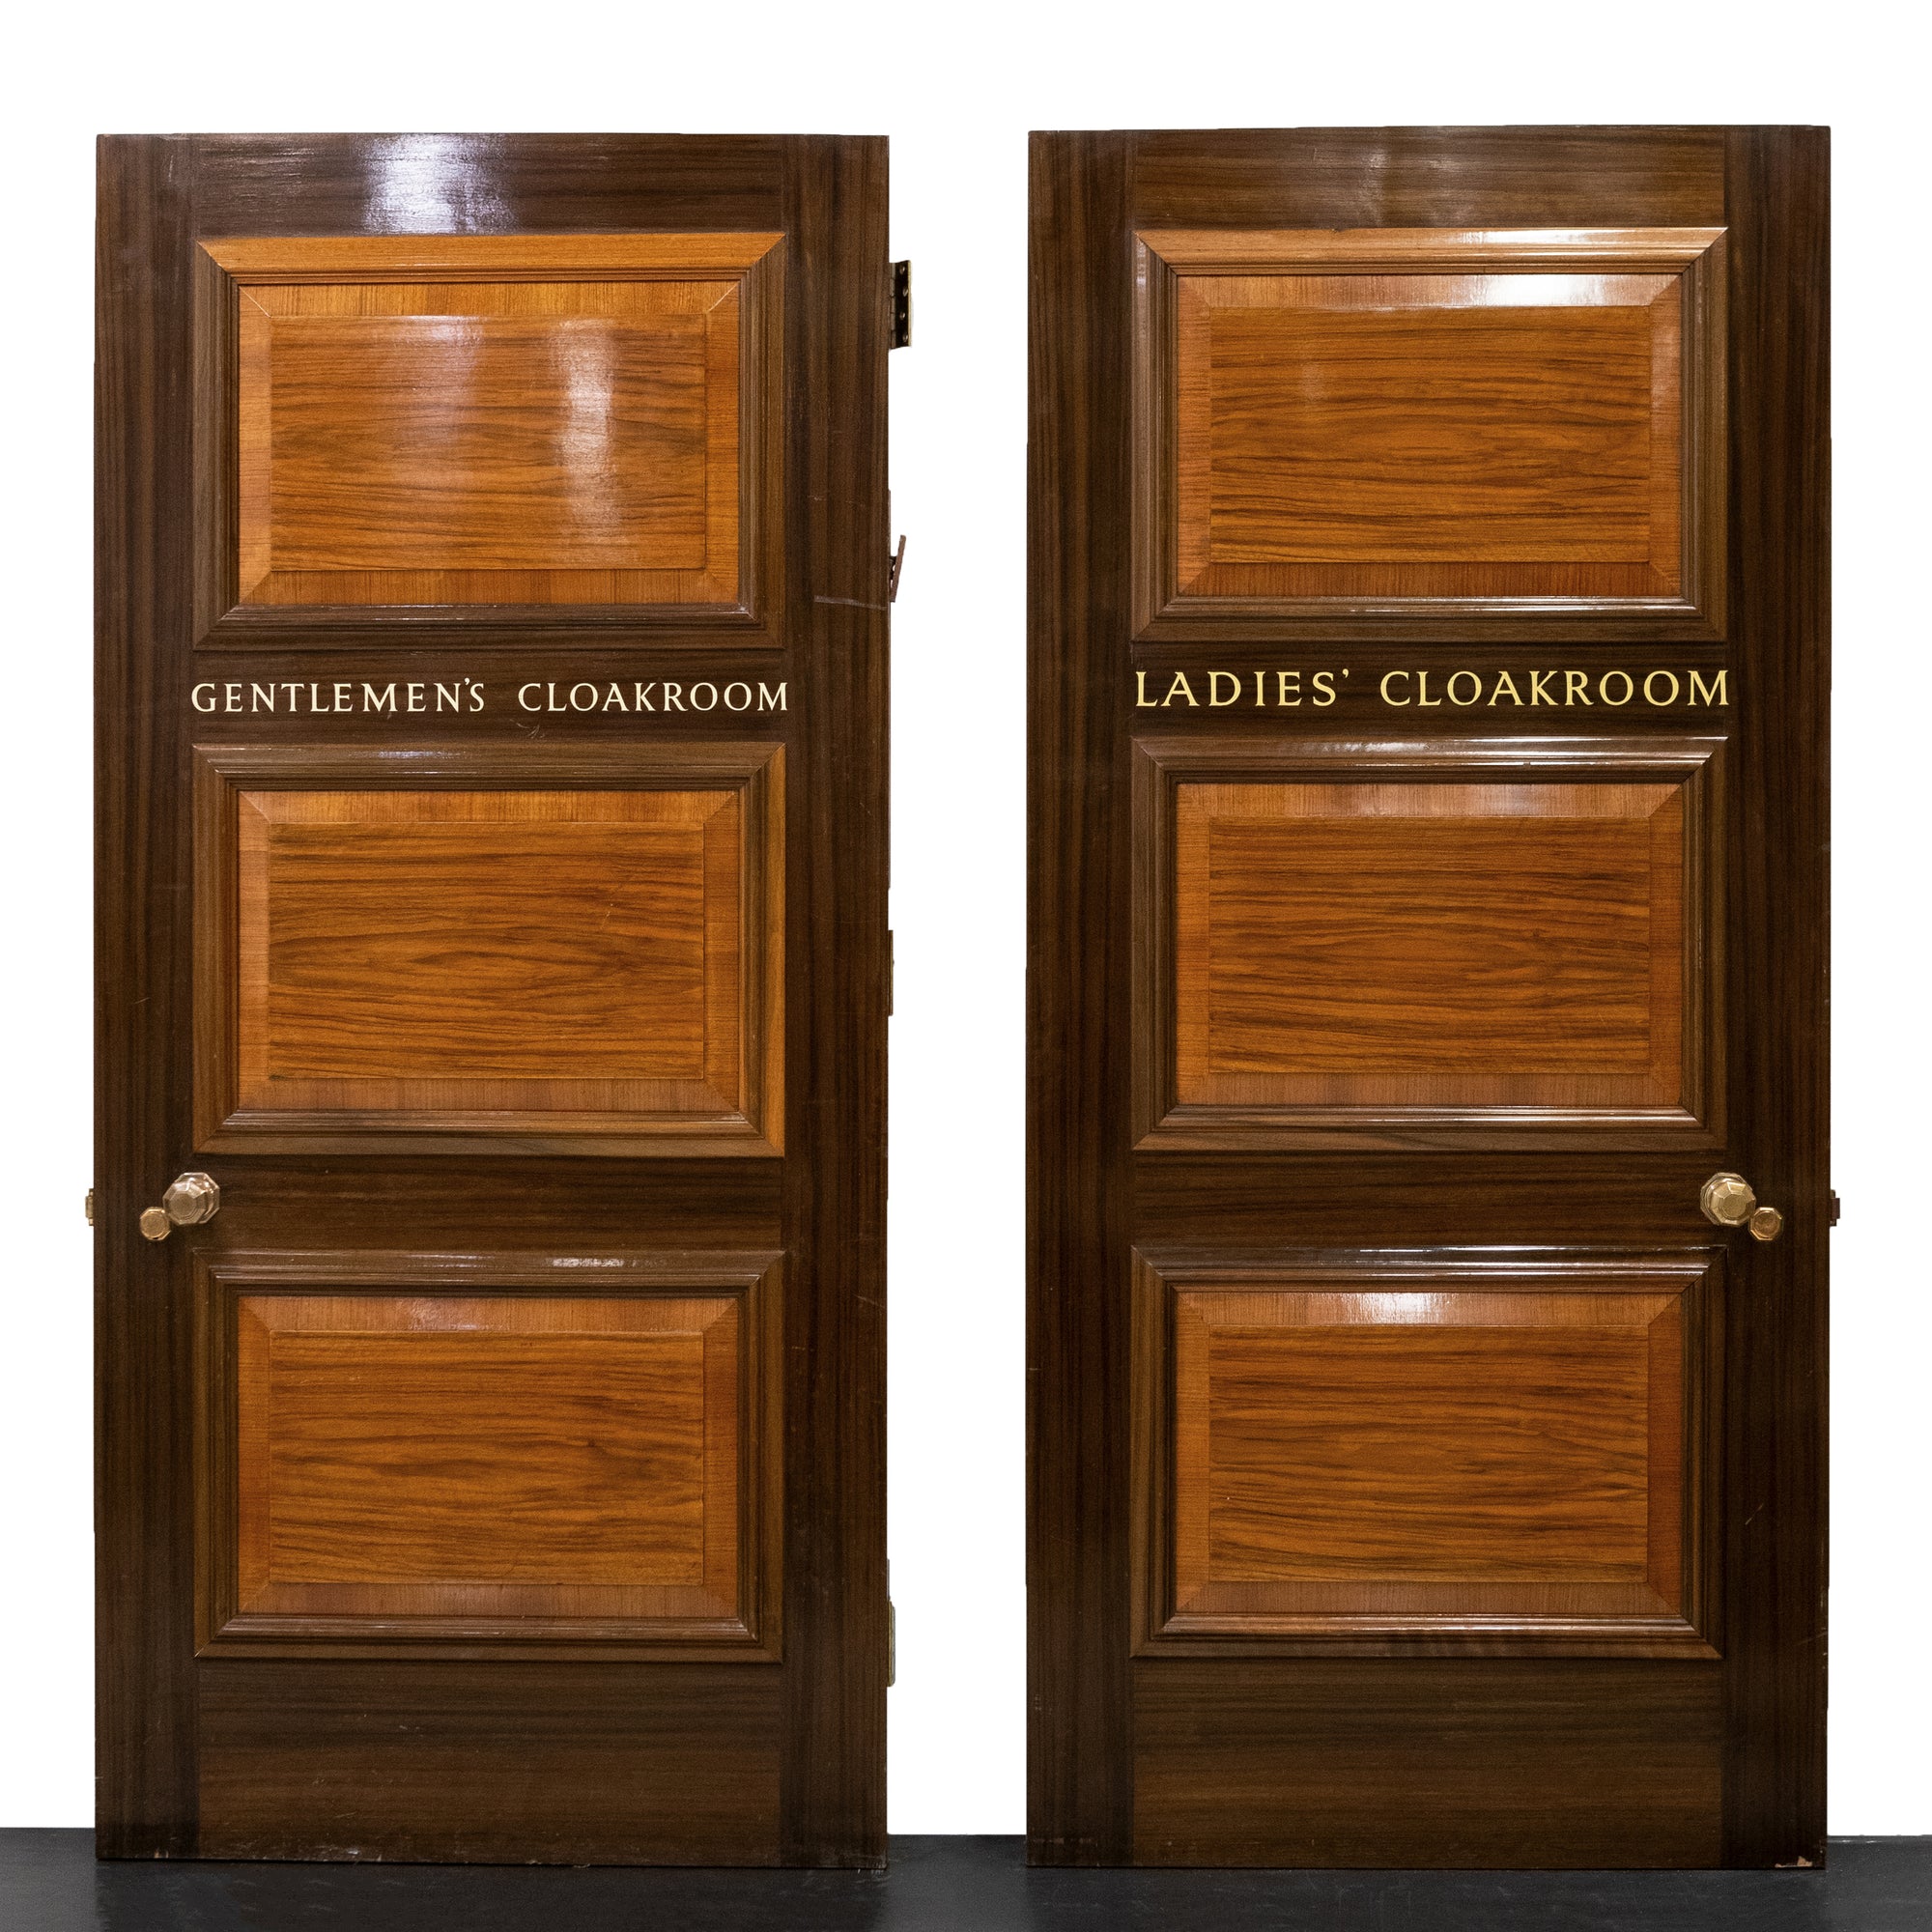 Walnut Cloakroom Doors Reclaimed From Clothworkers' Hall | The Architectural Forum